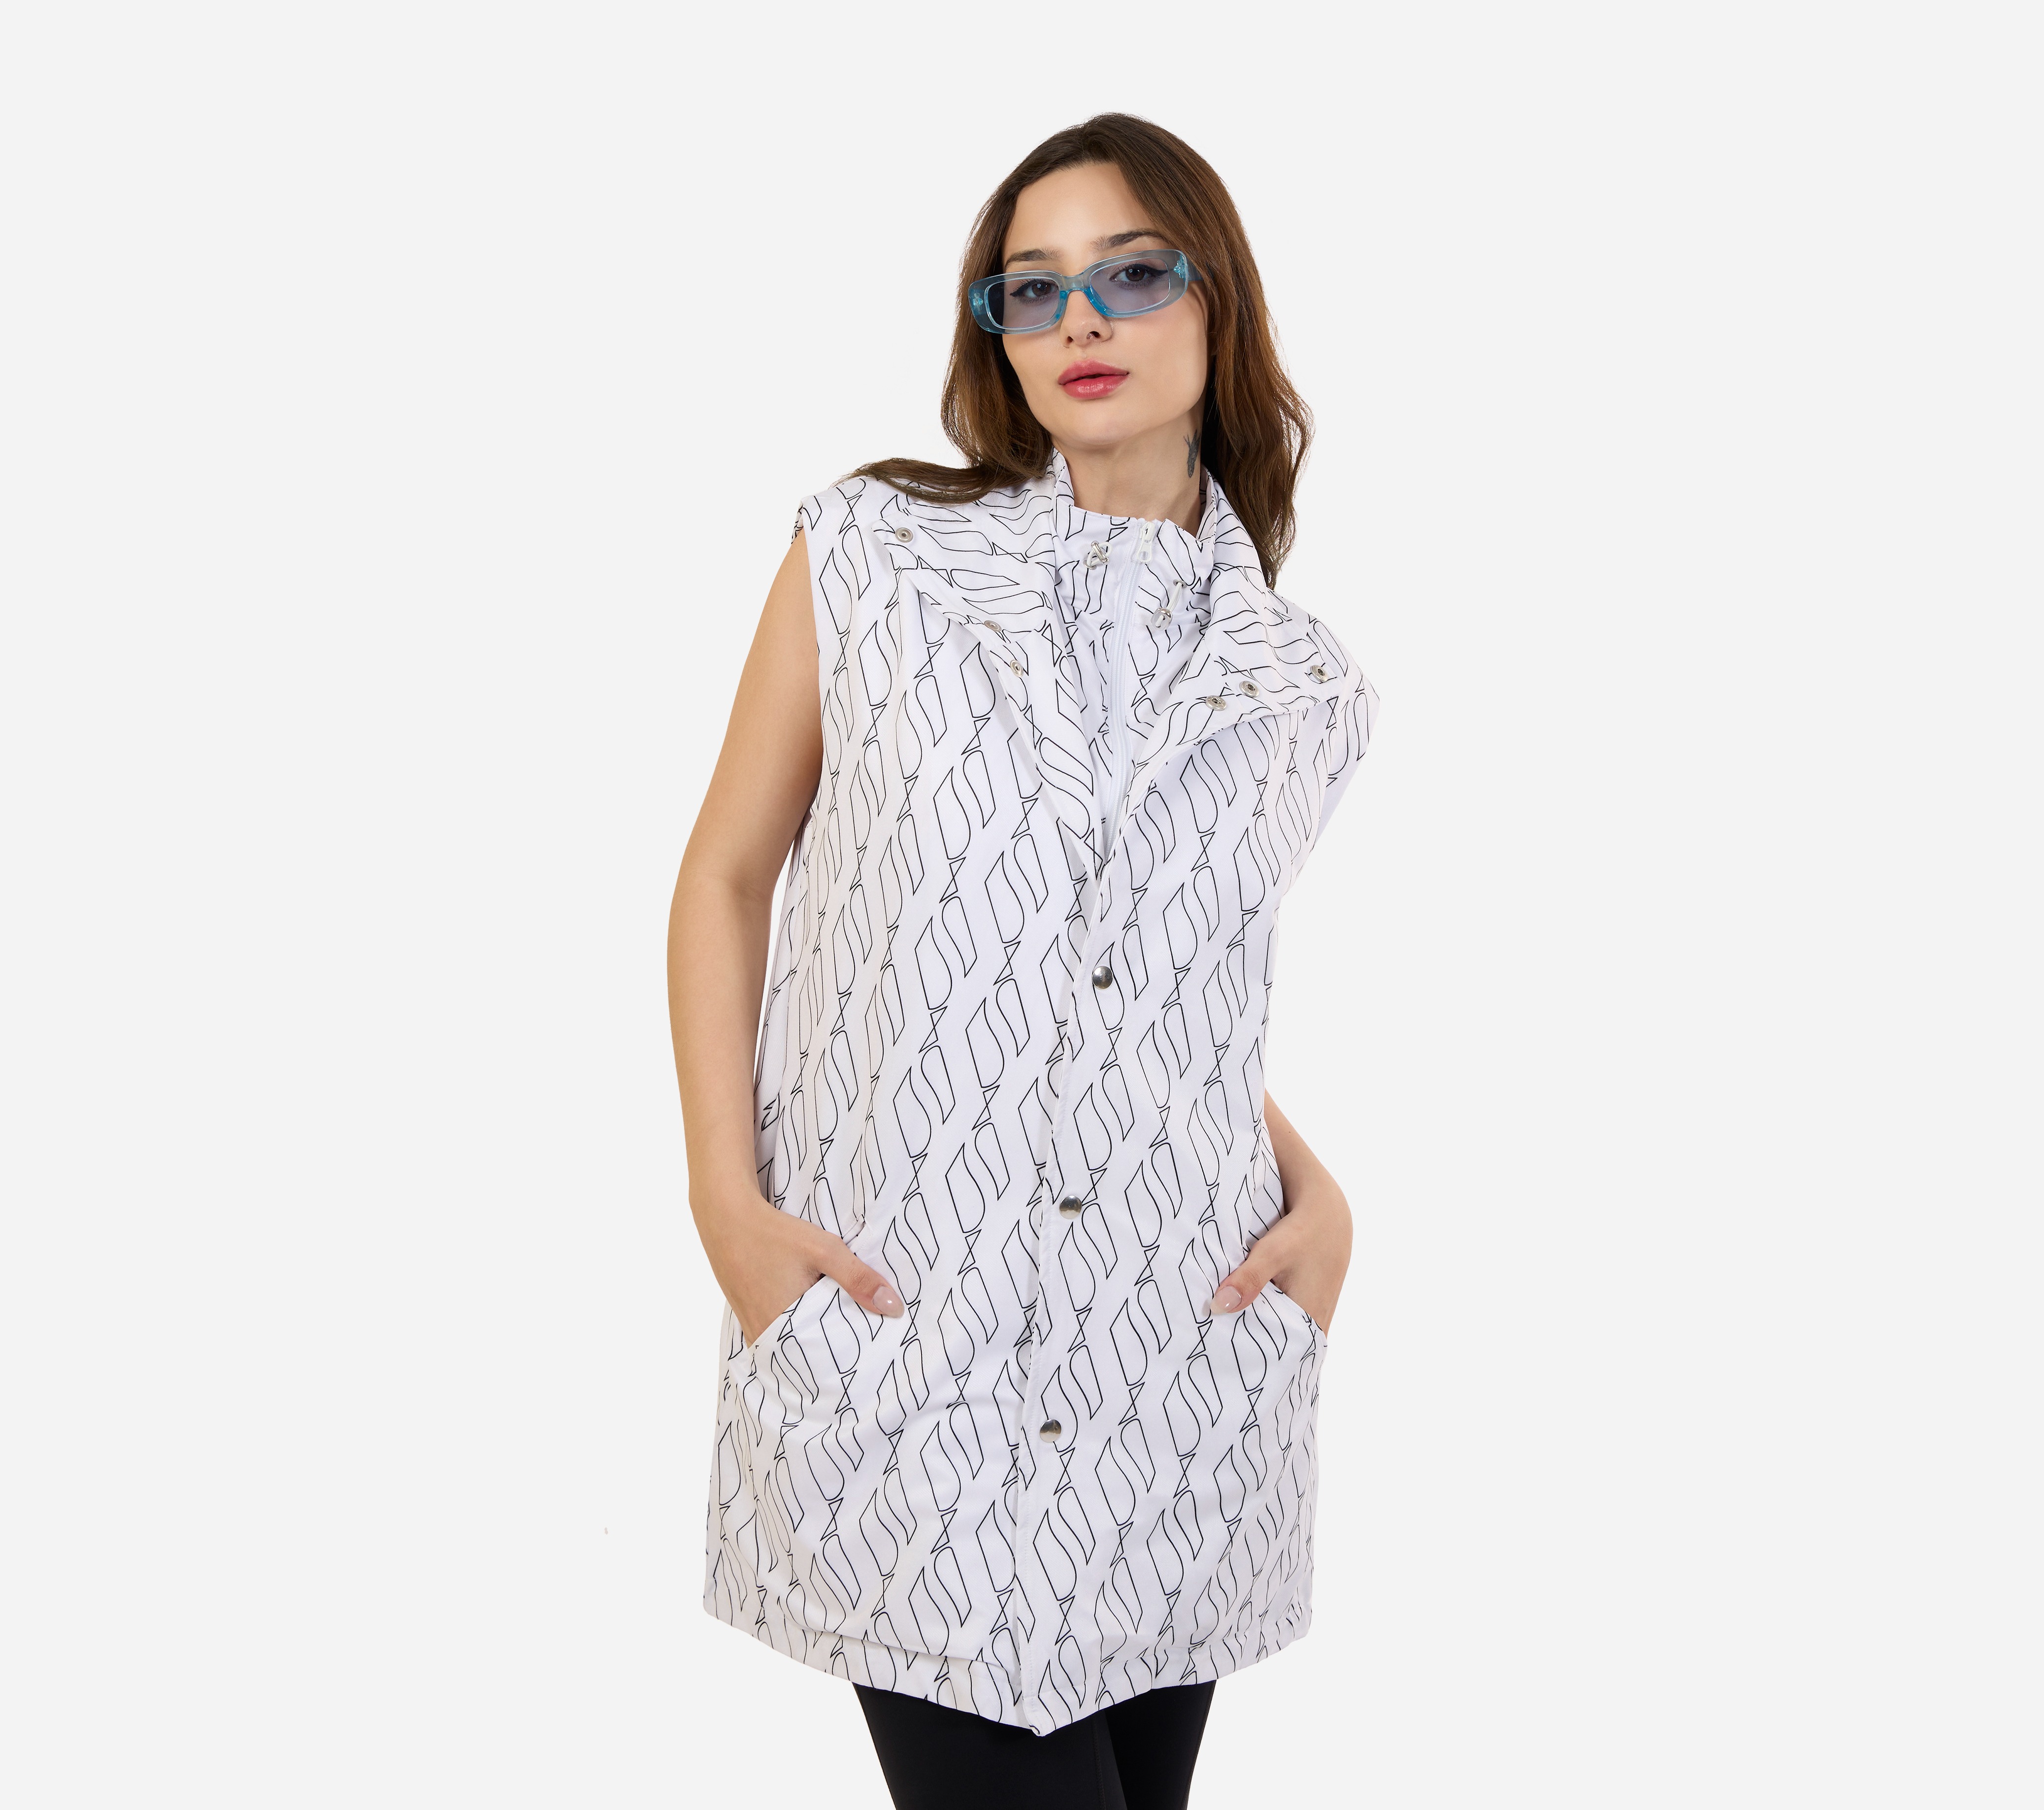 SLEEVELESS JACKET, OFFWHITE Apparel Lateral View